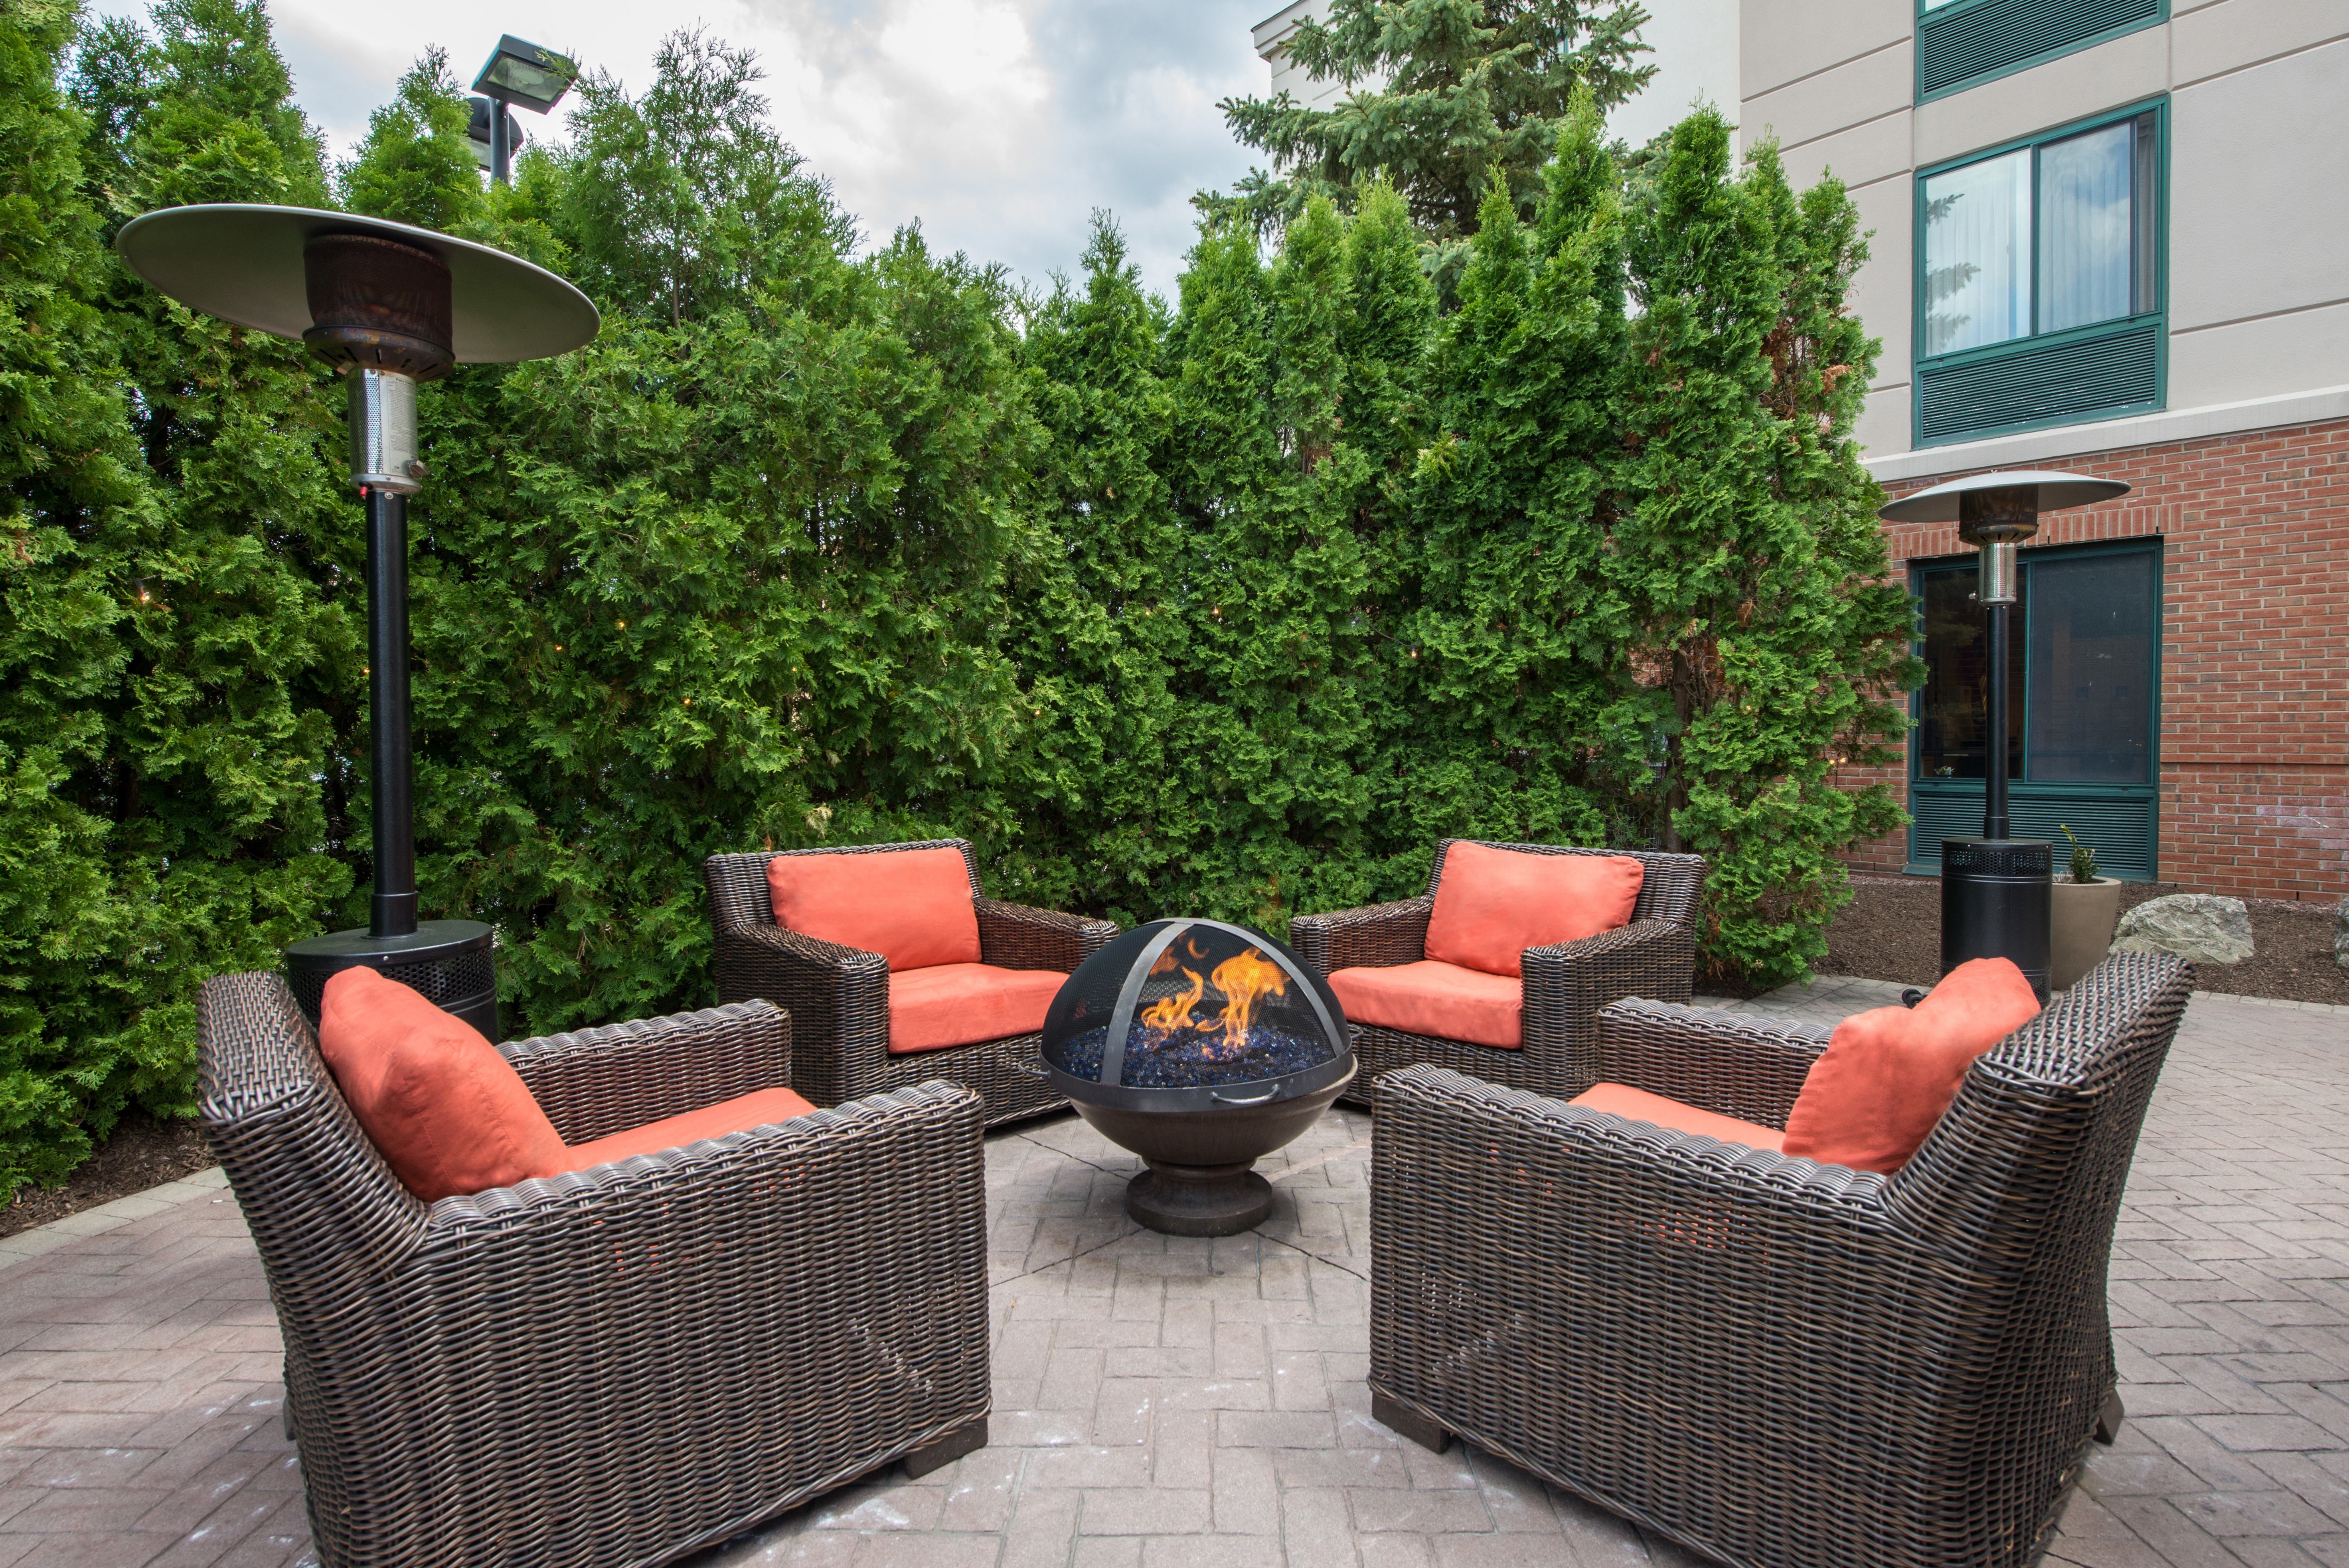 Outdoor Patio Seating and Firepit